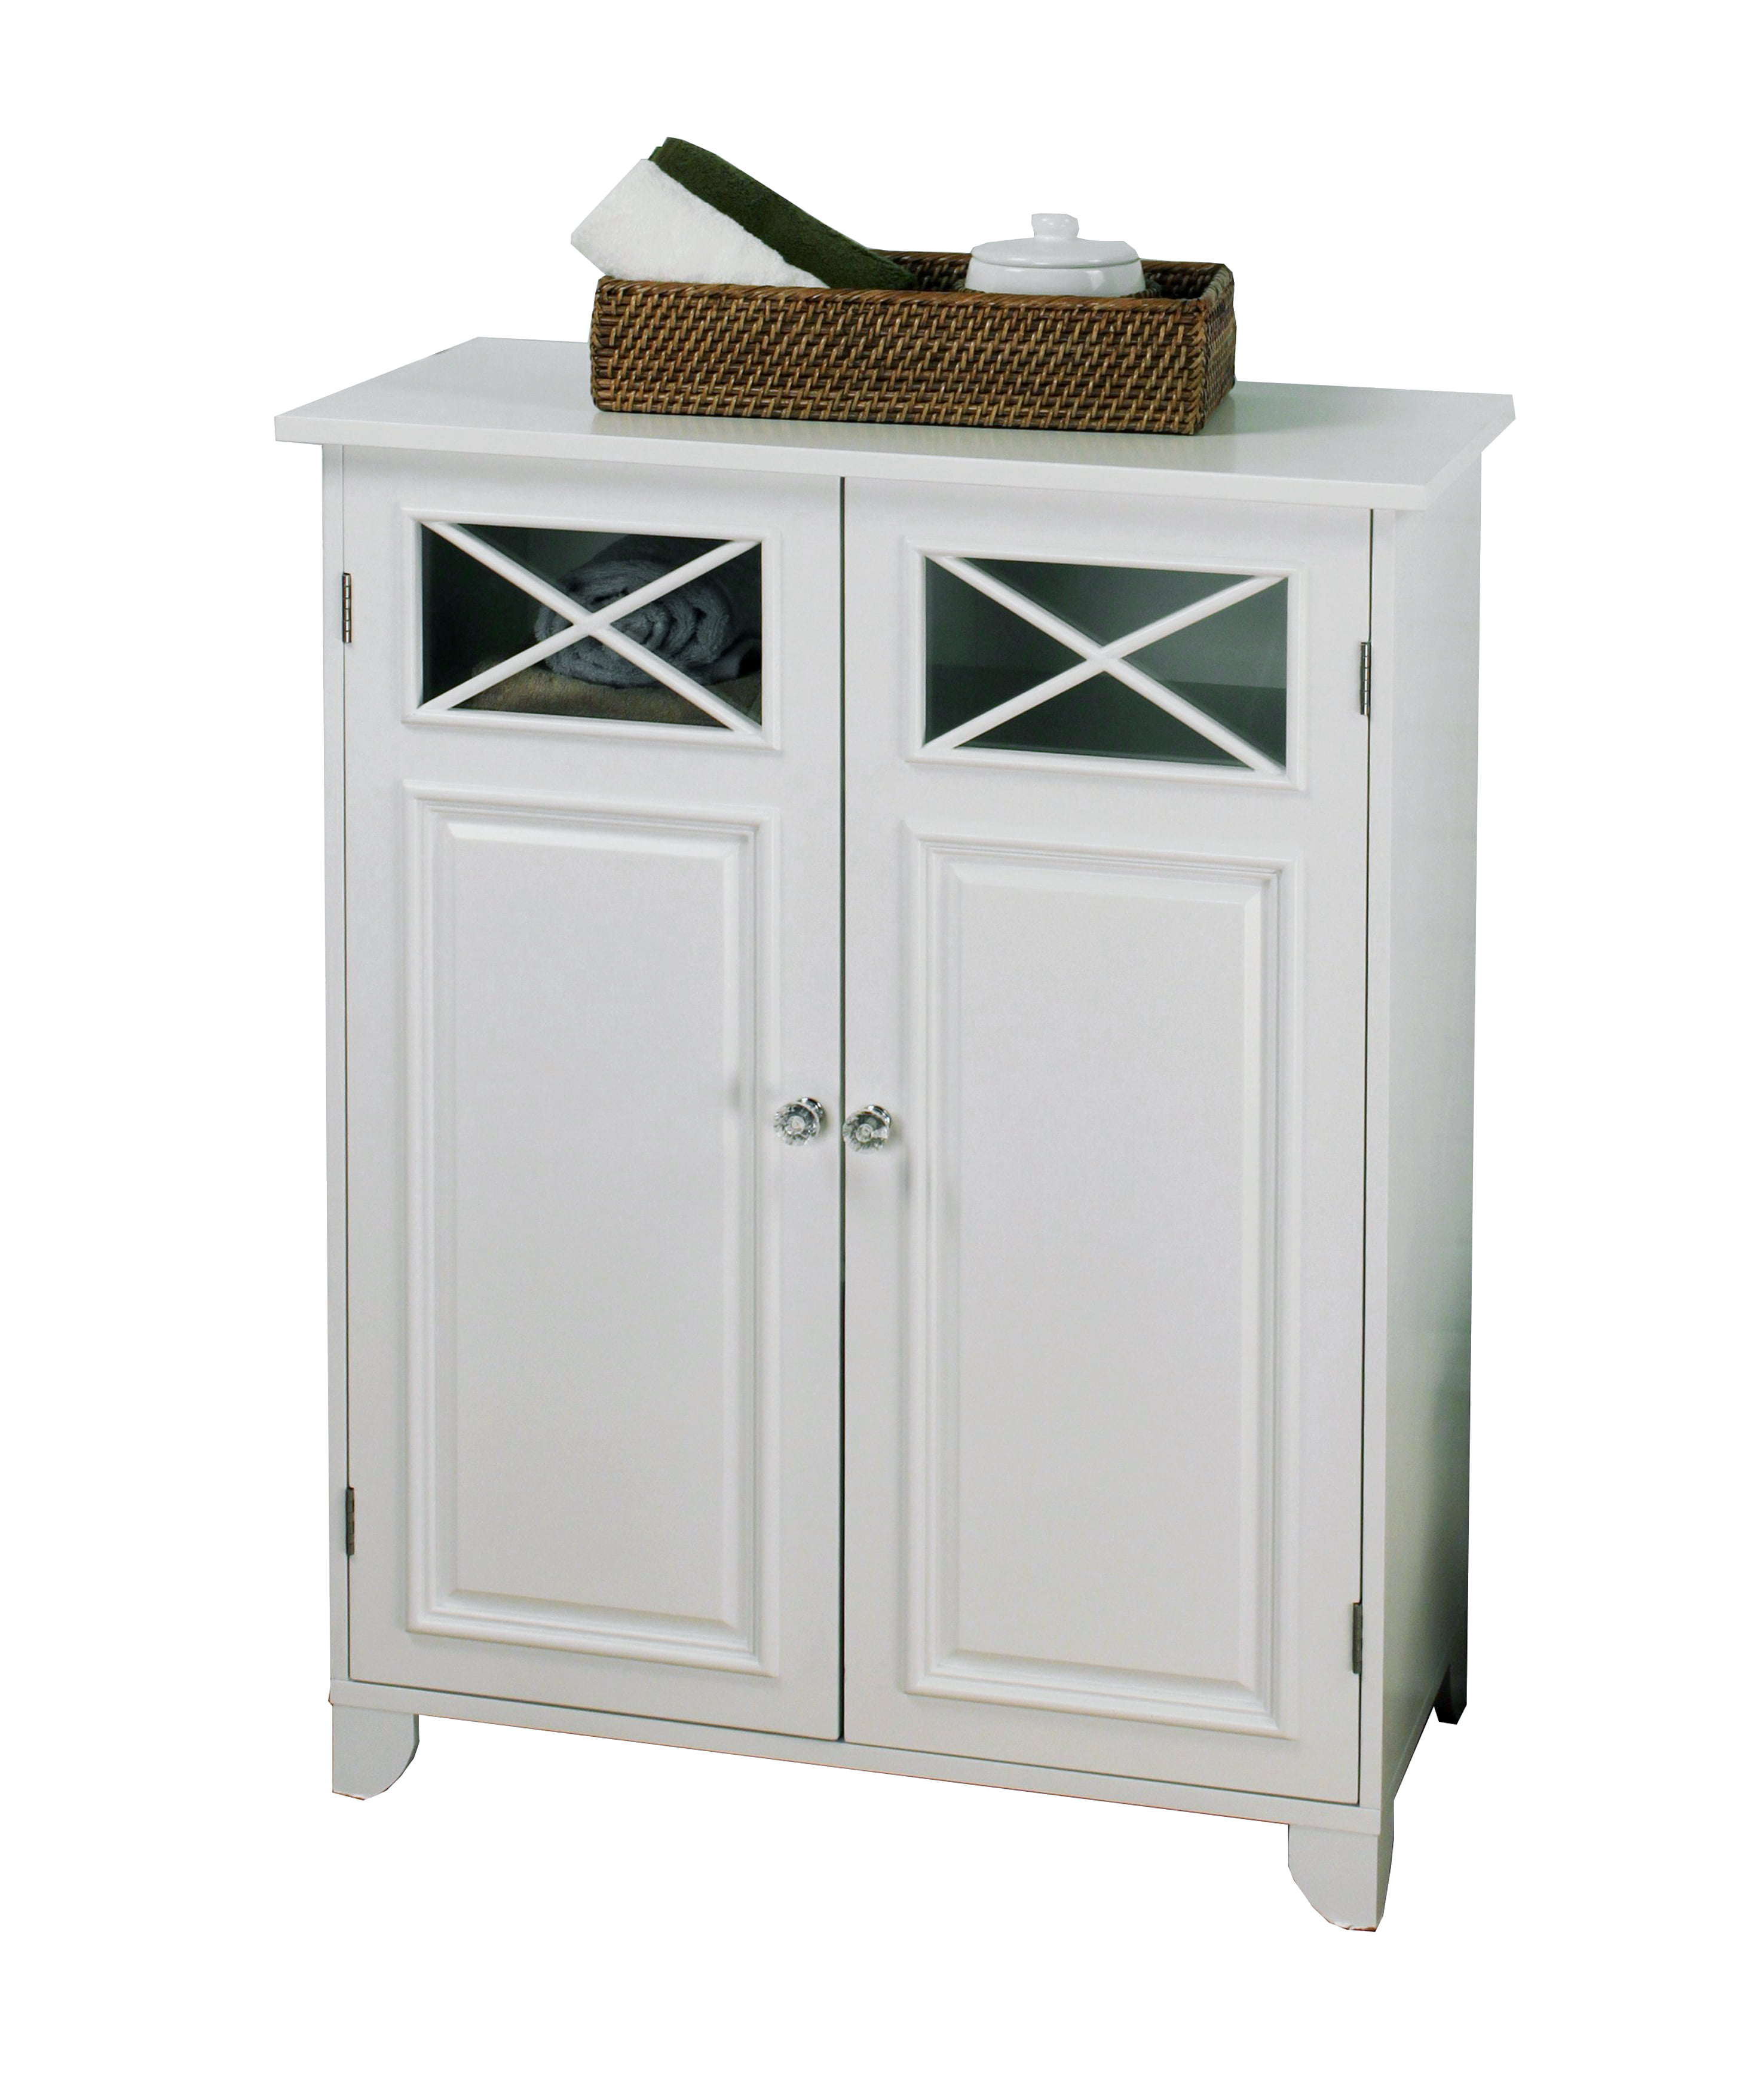 Teamson Home Dawson Wooden Floor Cabinet with Cross Molding and 2 Doors, White - image 7 of 9